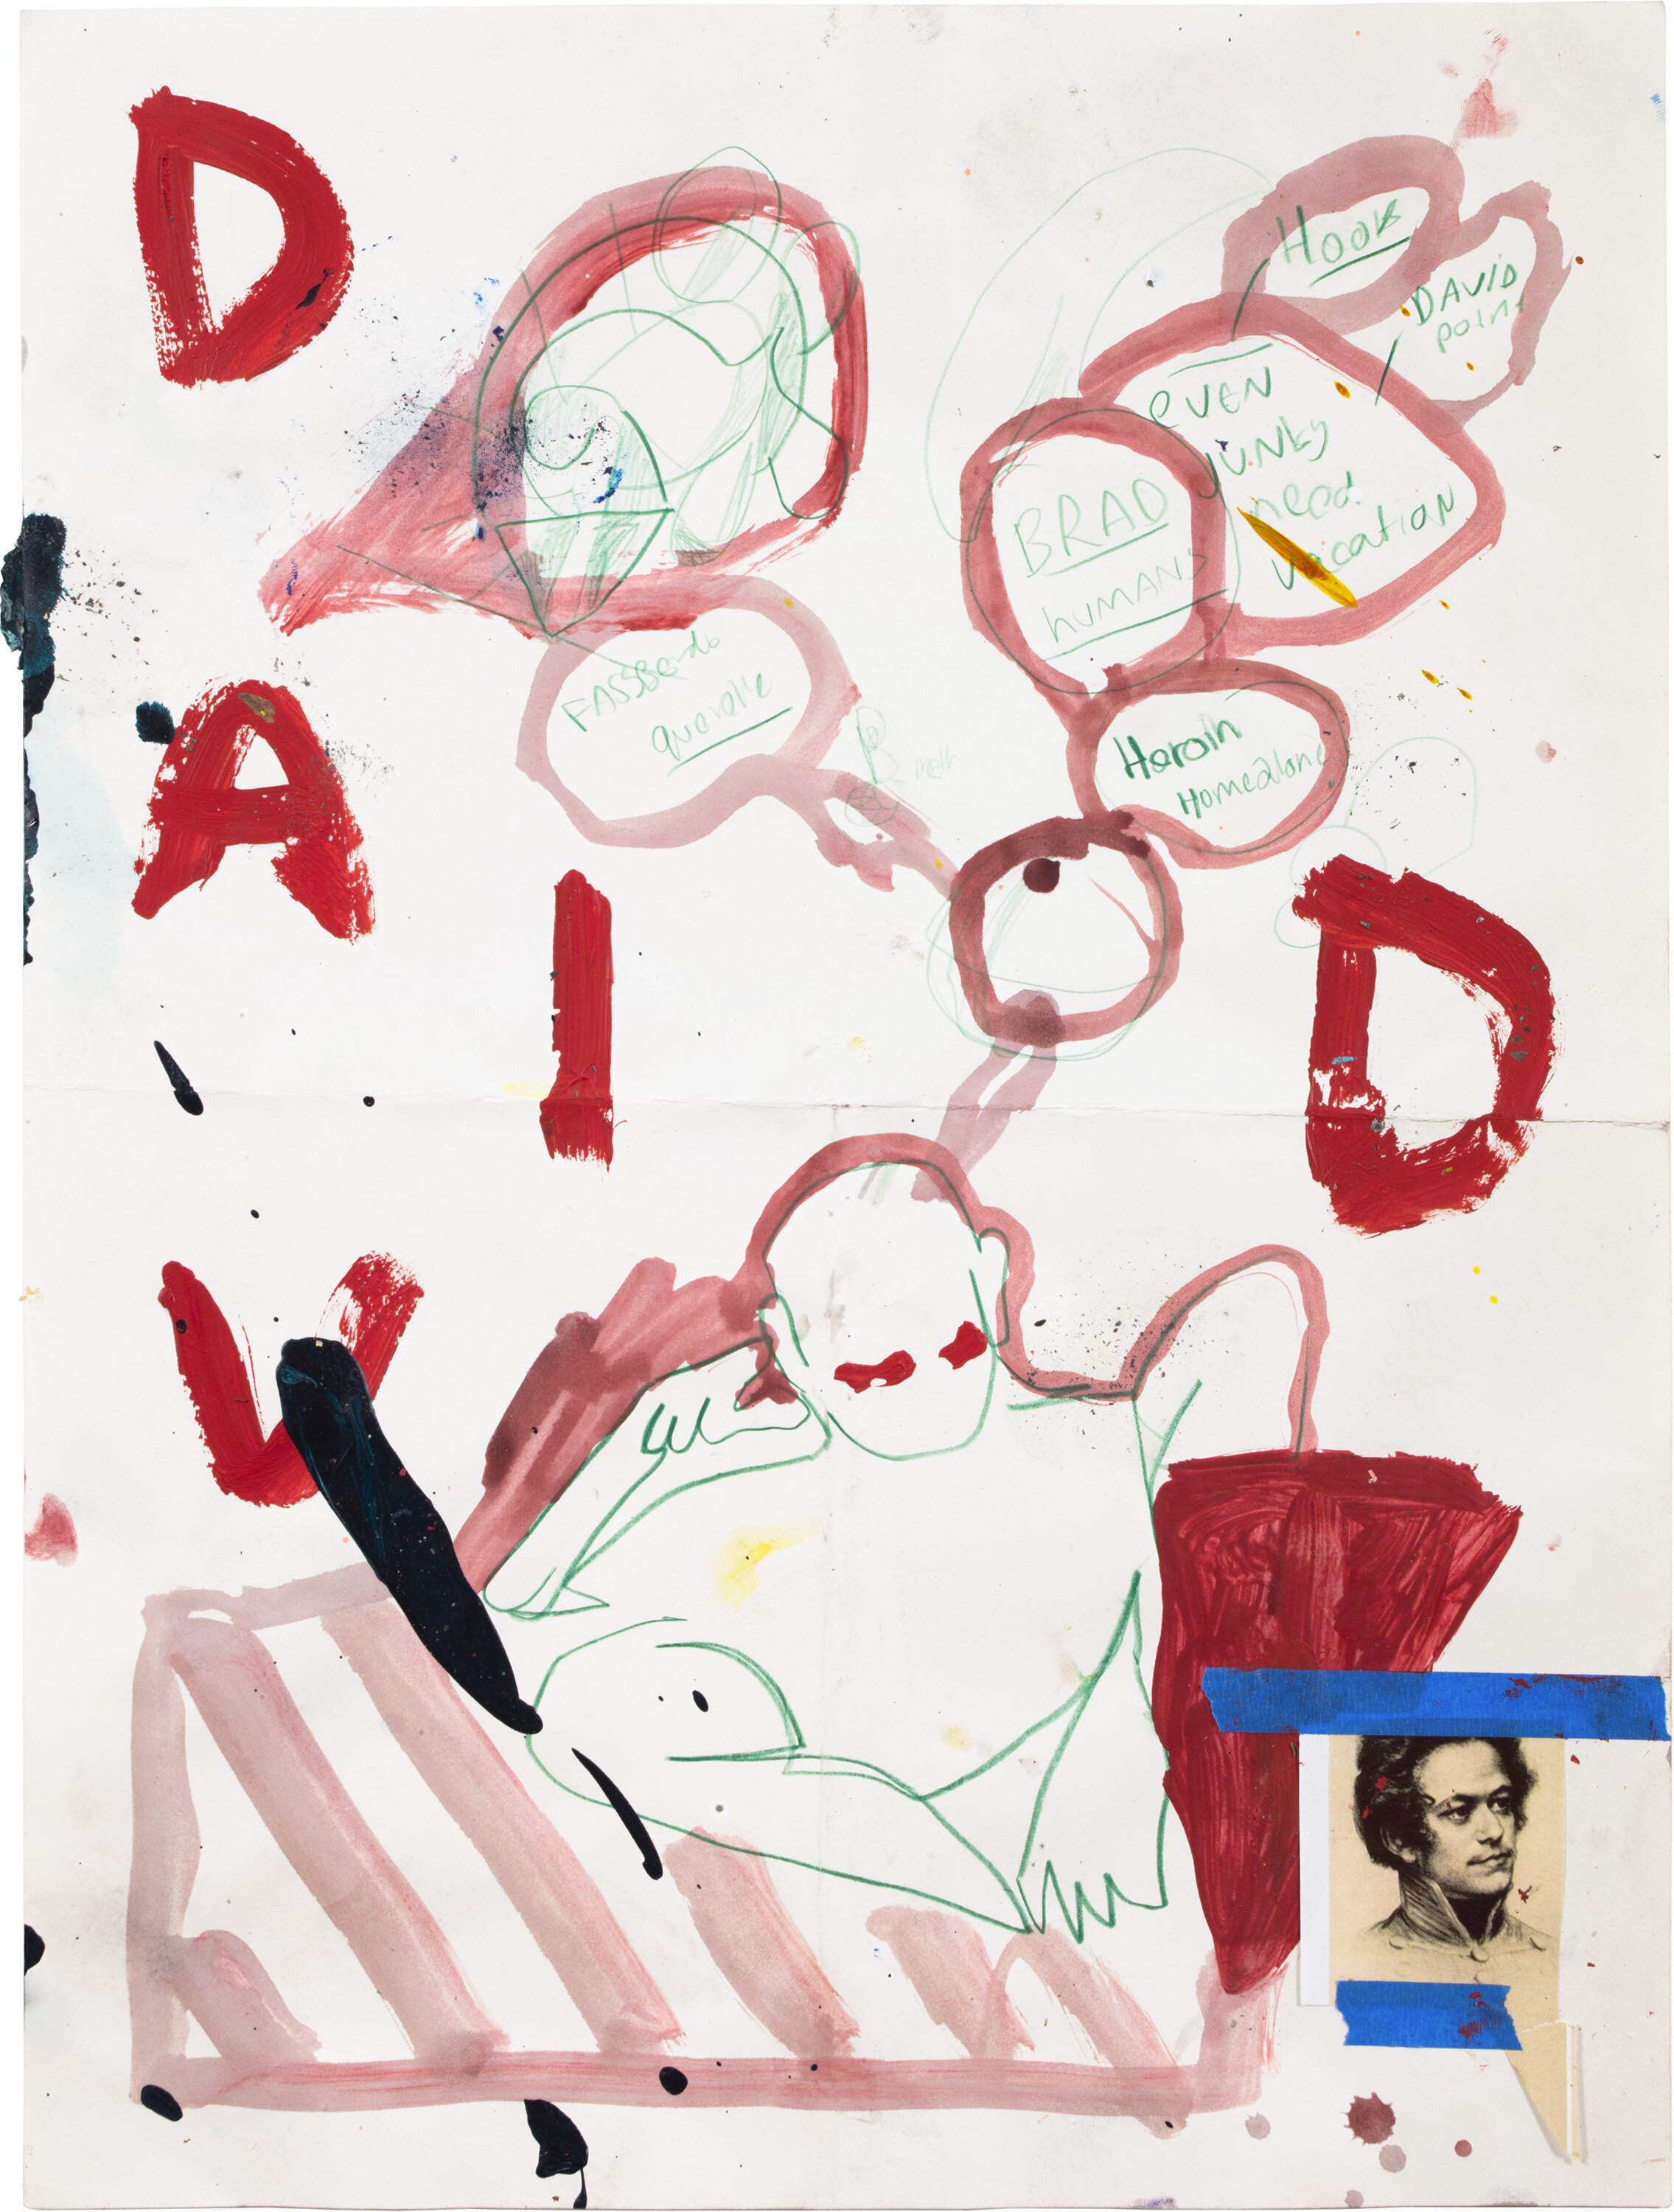  Drew Beattie and Ben Shepard   DBBS-DRW-2019-157   2019 acrylic, crayon, tape and collage on paper  24 x 18 inches 